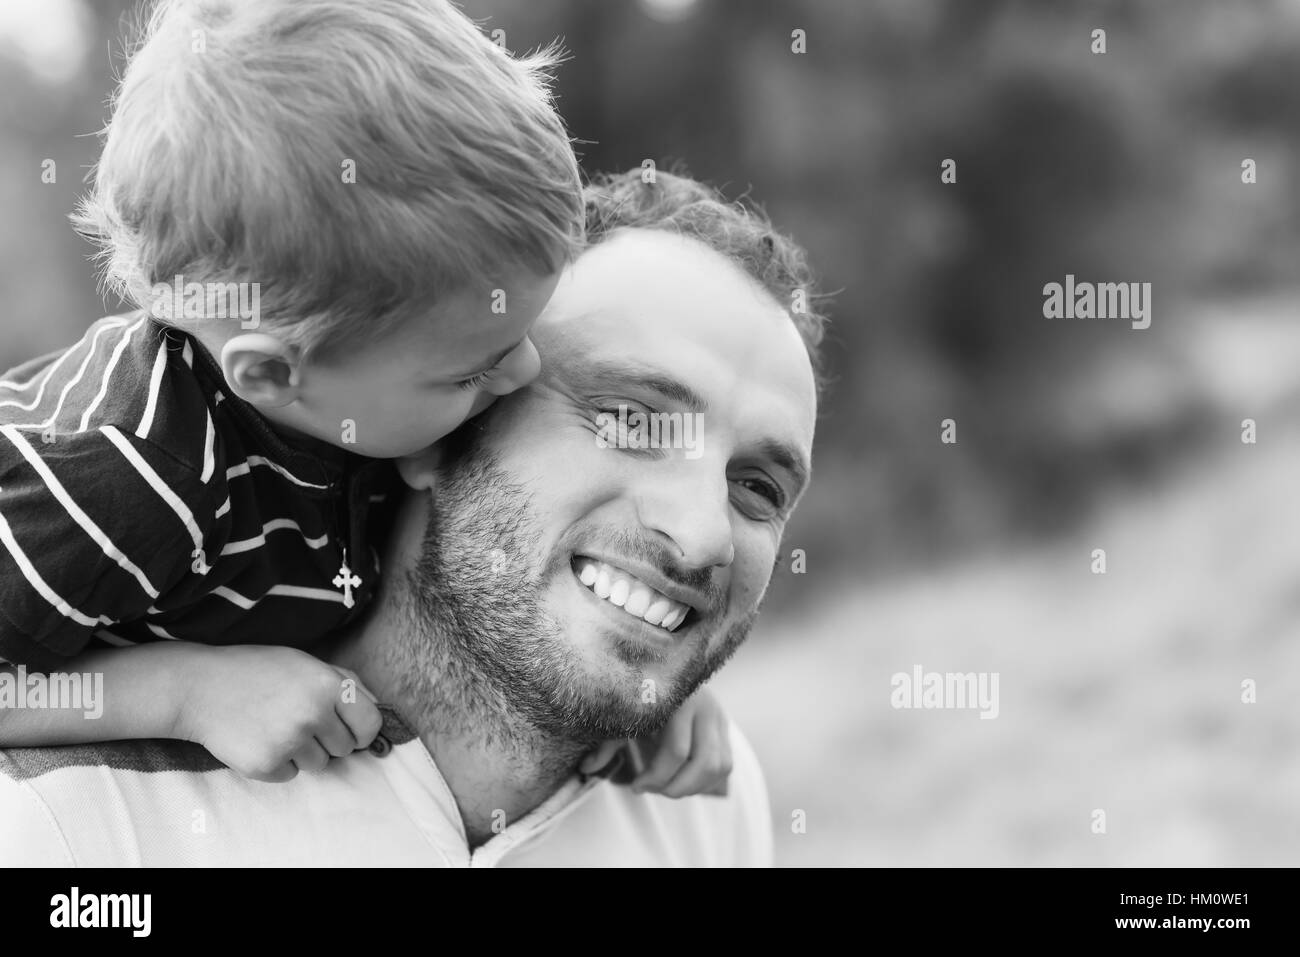 Child playing with his father. Daddy playing active games with his son outside. Happy family portrait. Laughing dad with little boy enjoying nature to Stock Photo